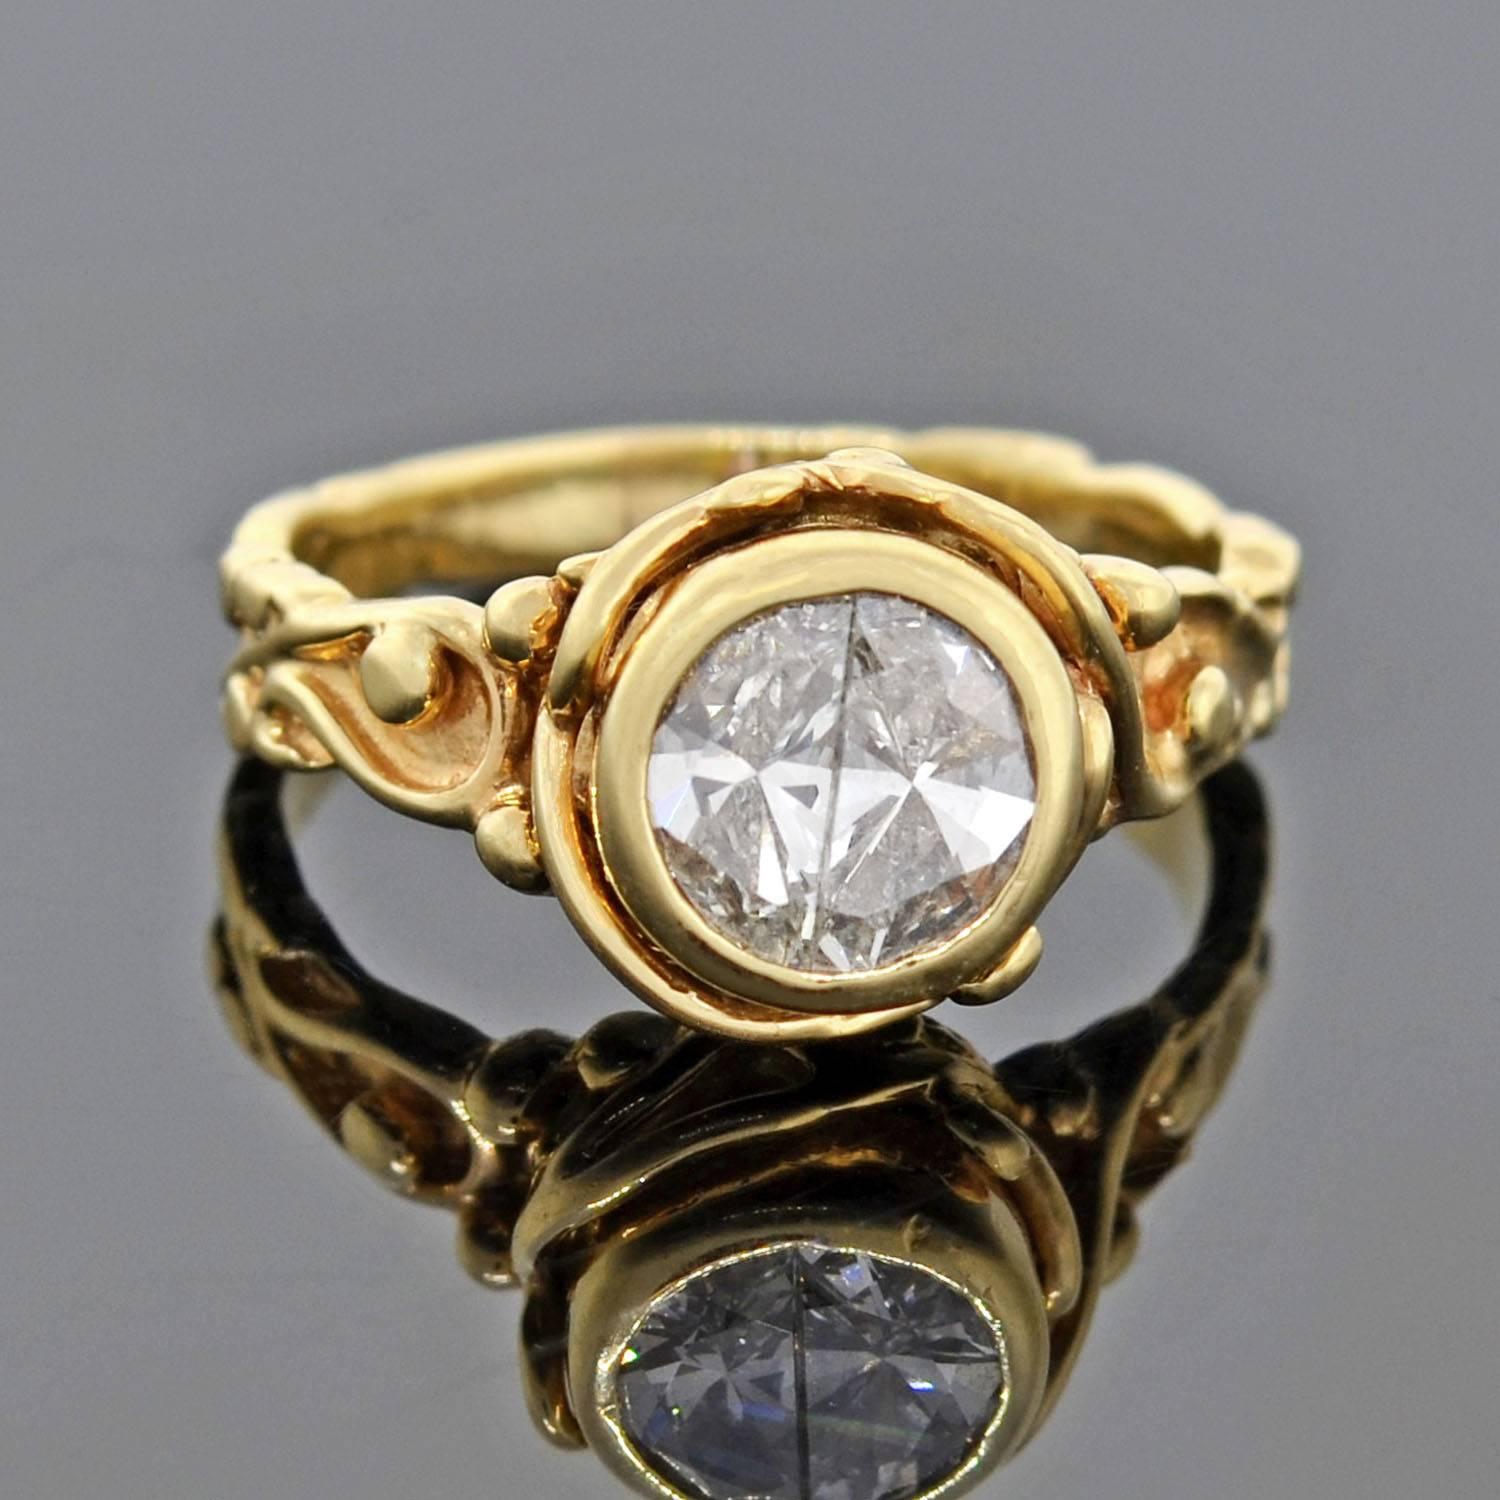 A beautiful and unusual vintage diamond ring from the 1960s! Crafted in 14kt gold, the sculptural setting frames two 